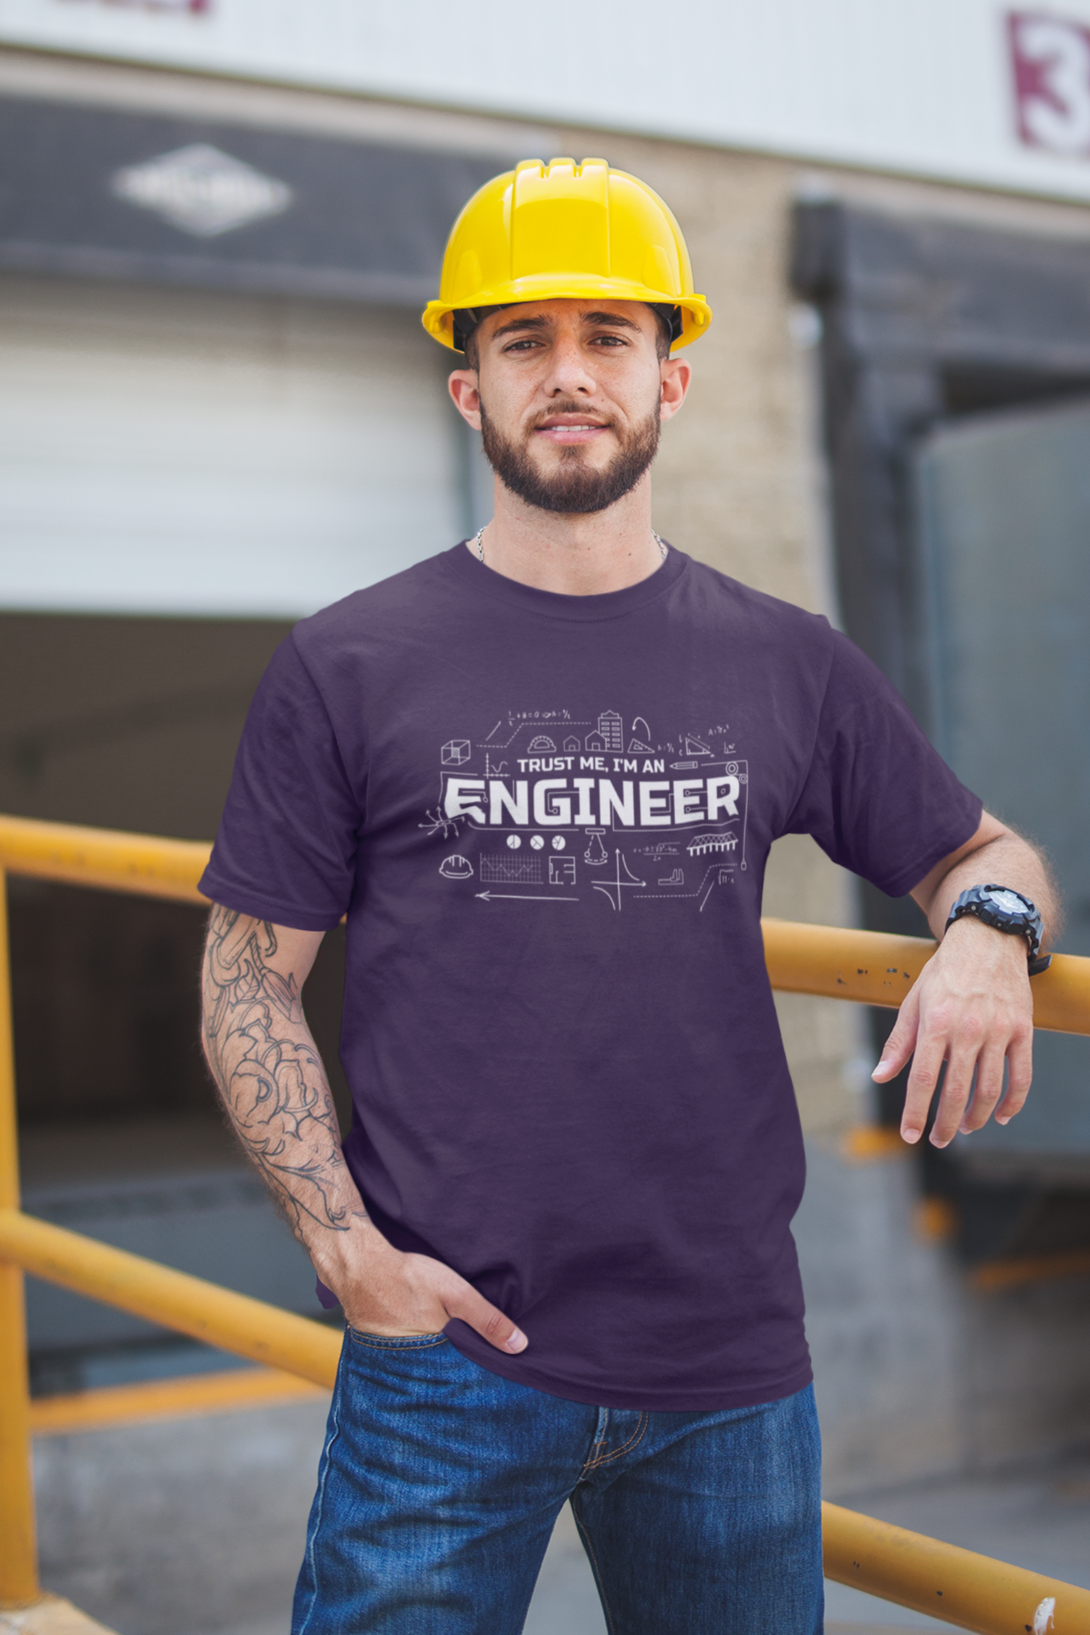 Trust Me, I'M An Engineer Printed T-Shirt For Men - WowWaves - 3